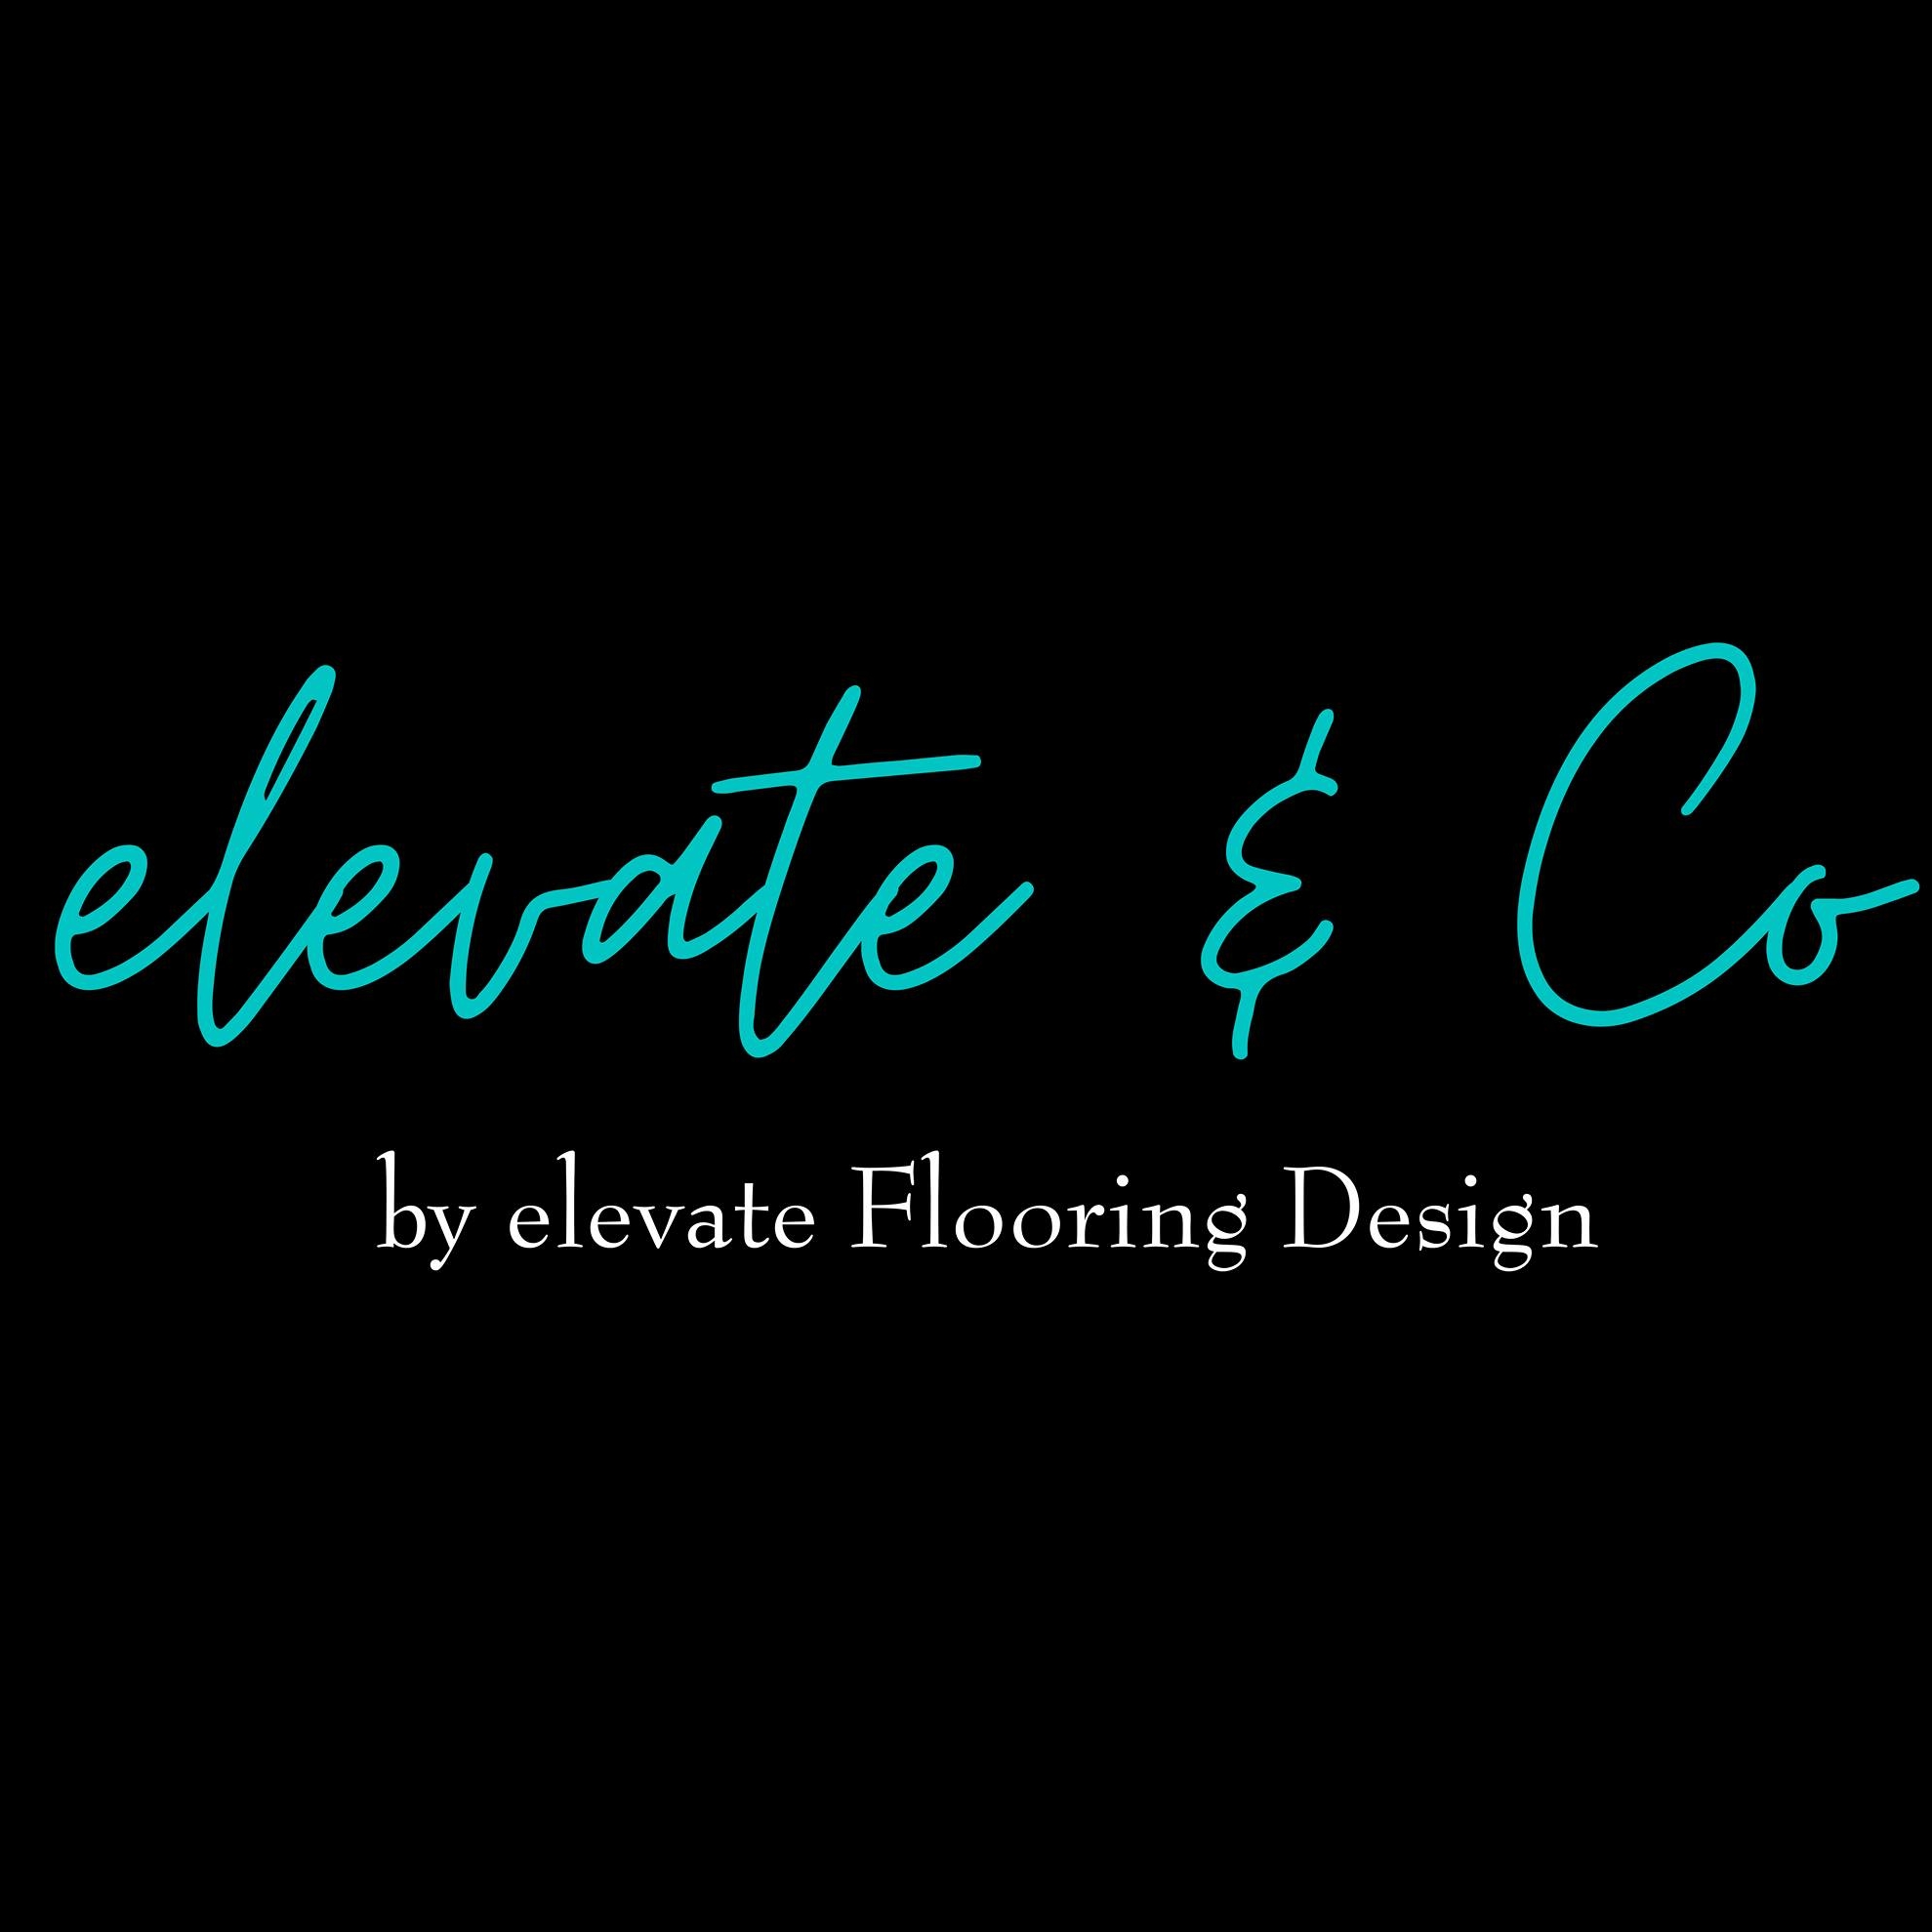 Elevate & Co.